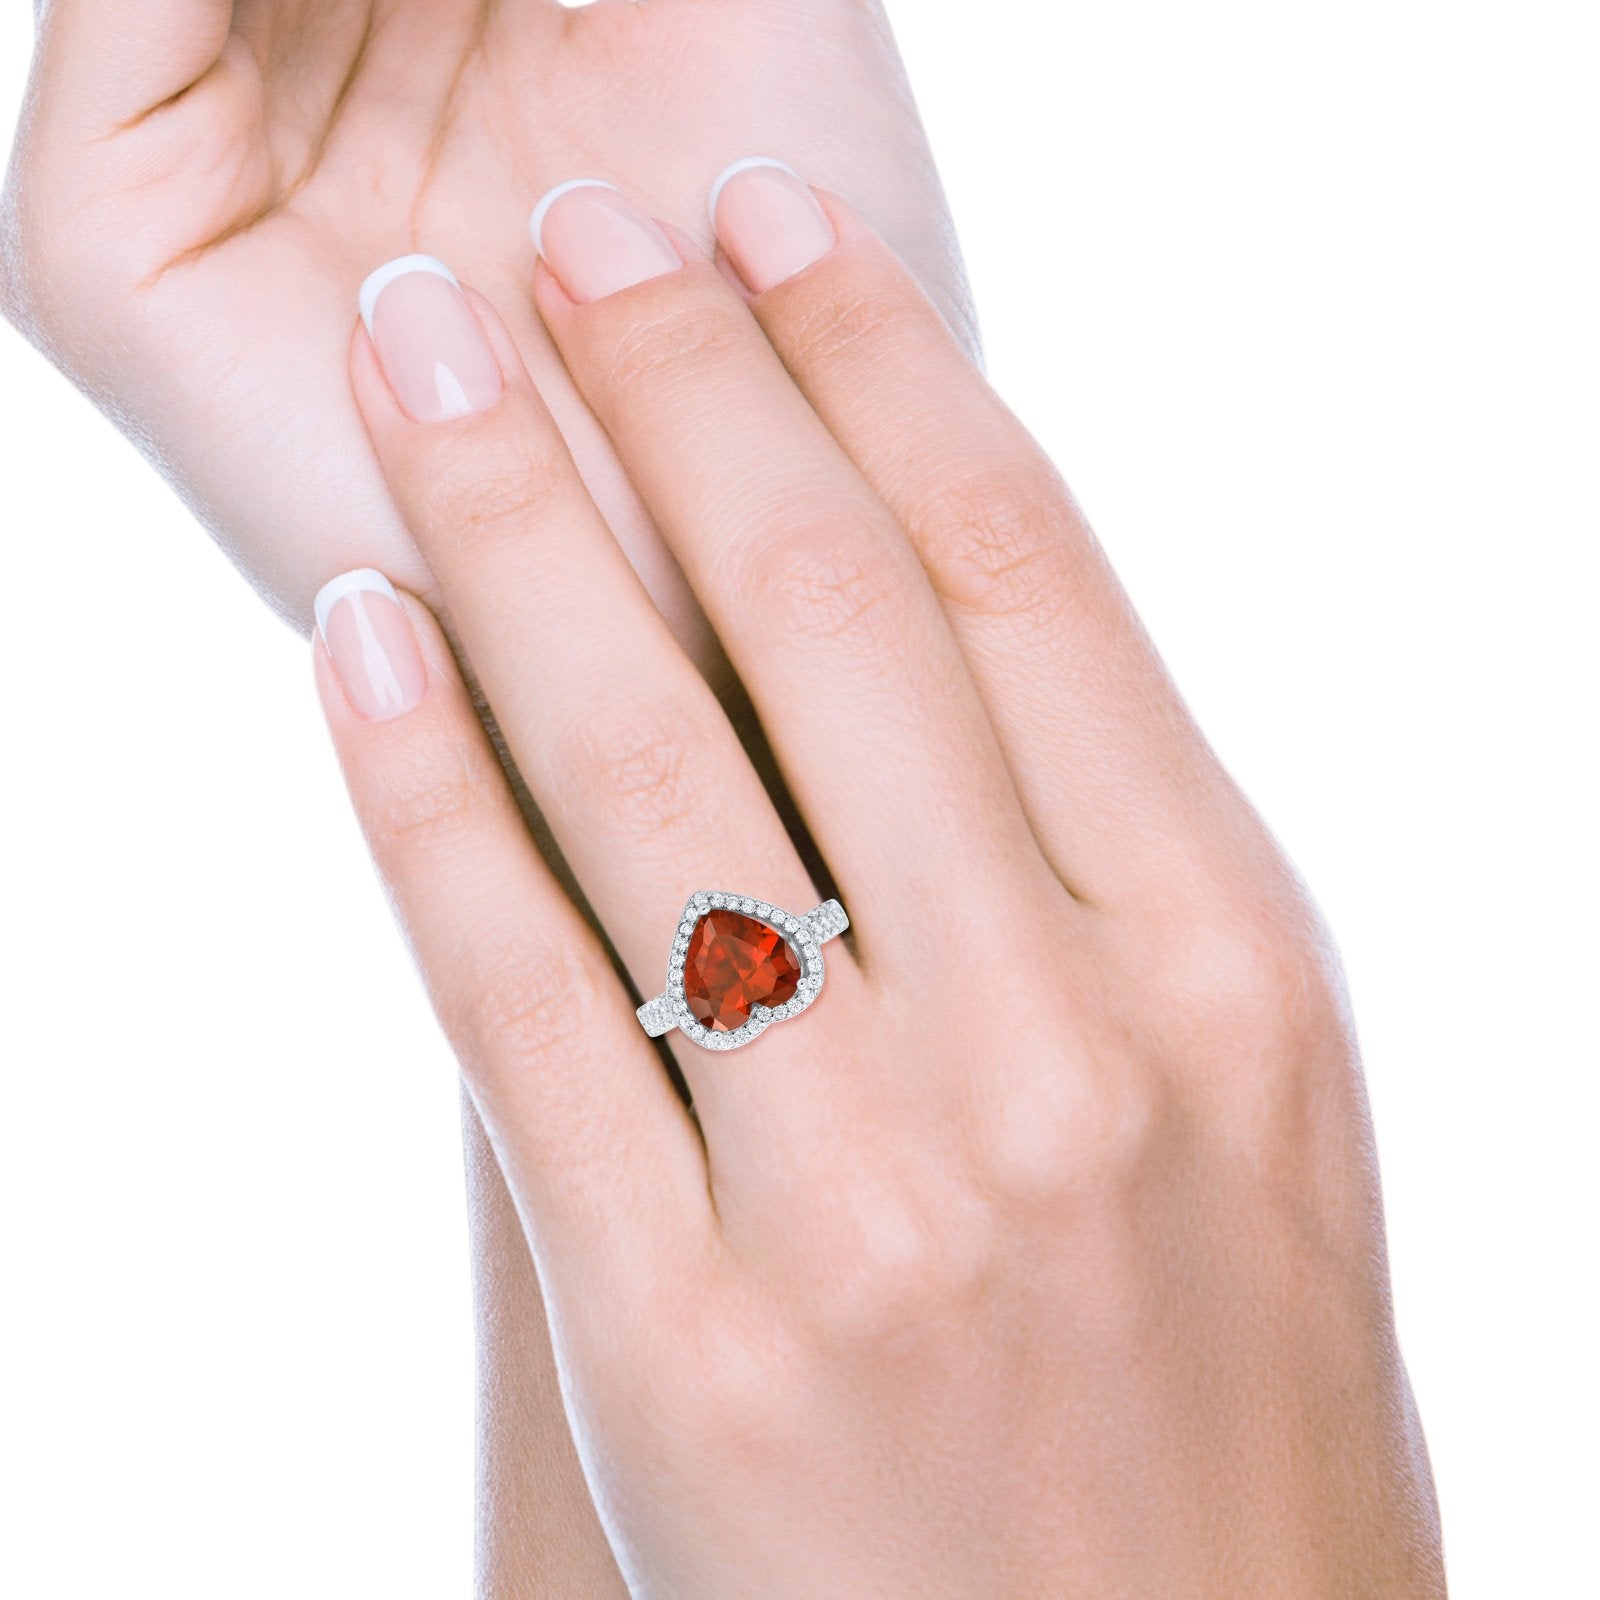 Halo Fashion Ring Heart Simulated Garnet Cubic Zirconia 925 Sterling Silver